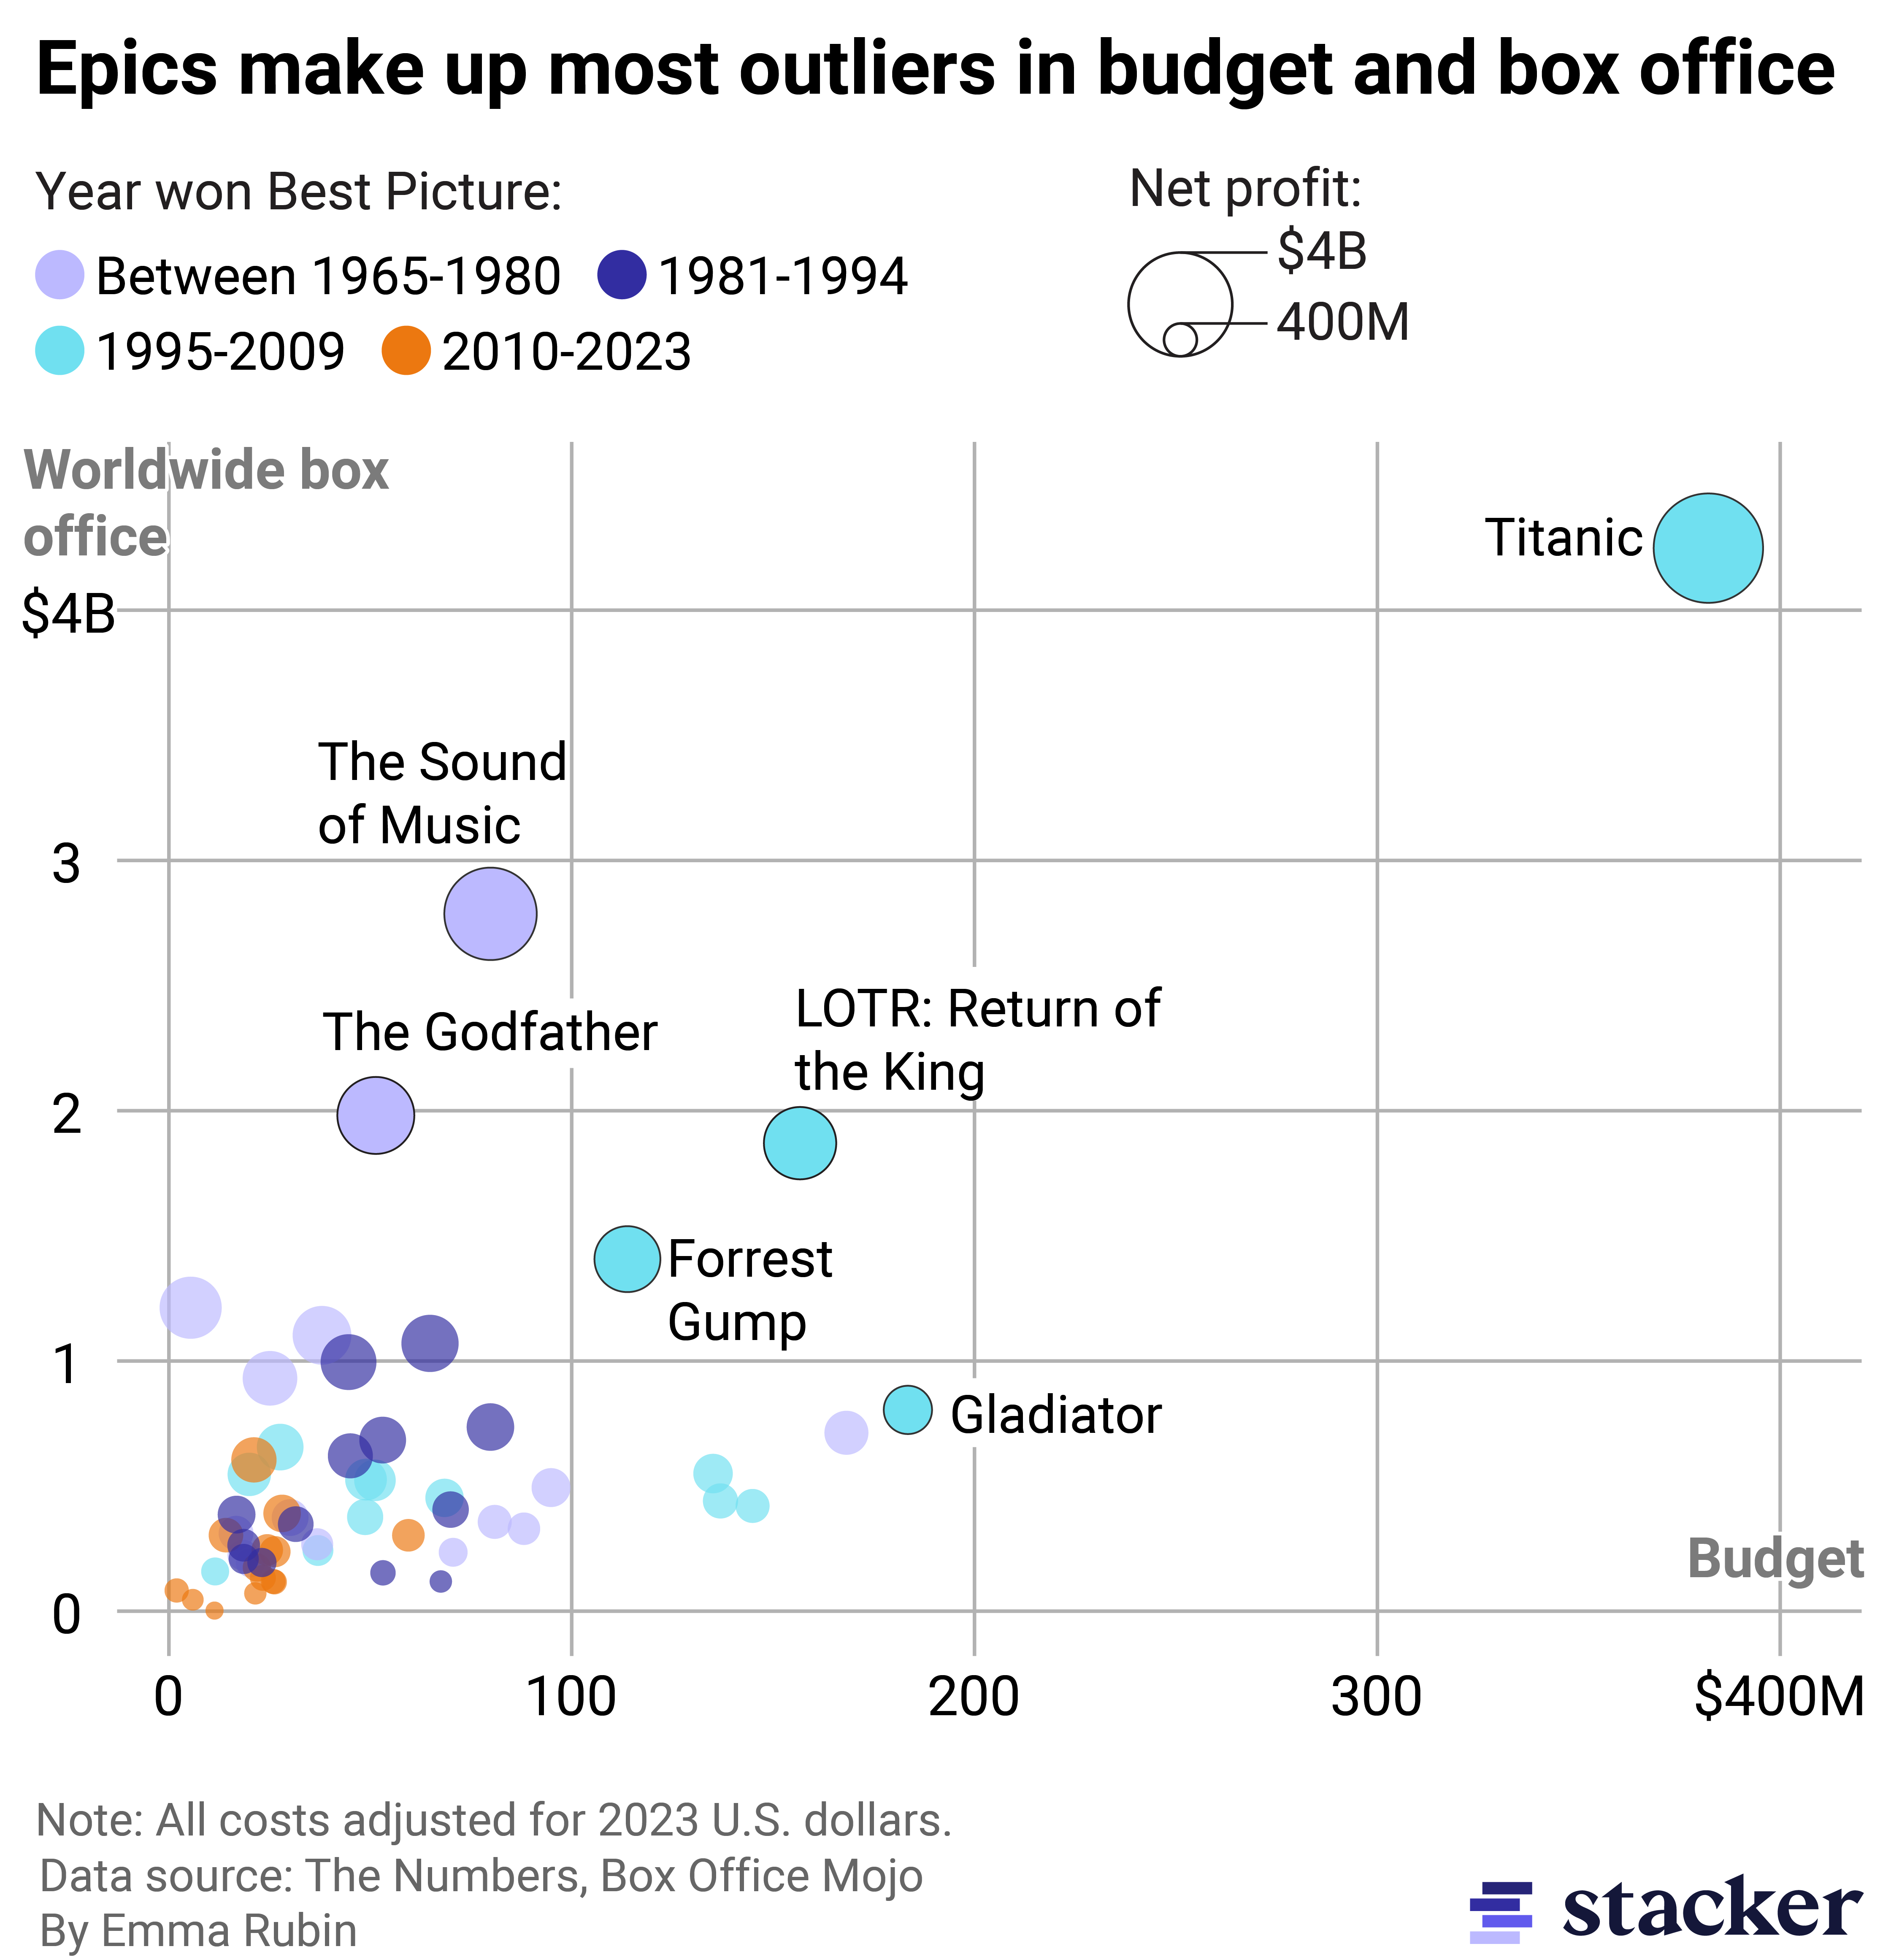 Scatterplot showing epics like Titanic and Lord of the Rings make up outliers among Best Picture winners for higher budgets and box office returns.